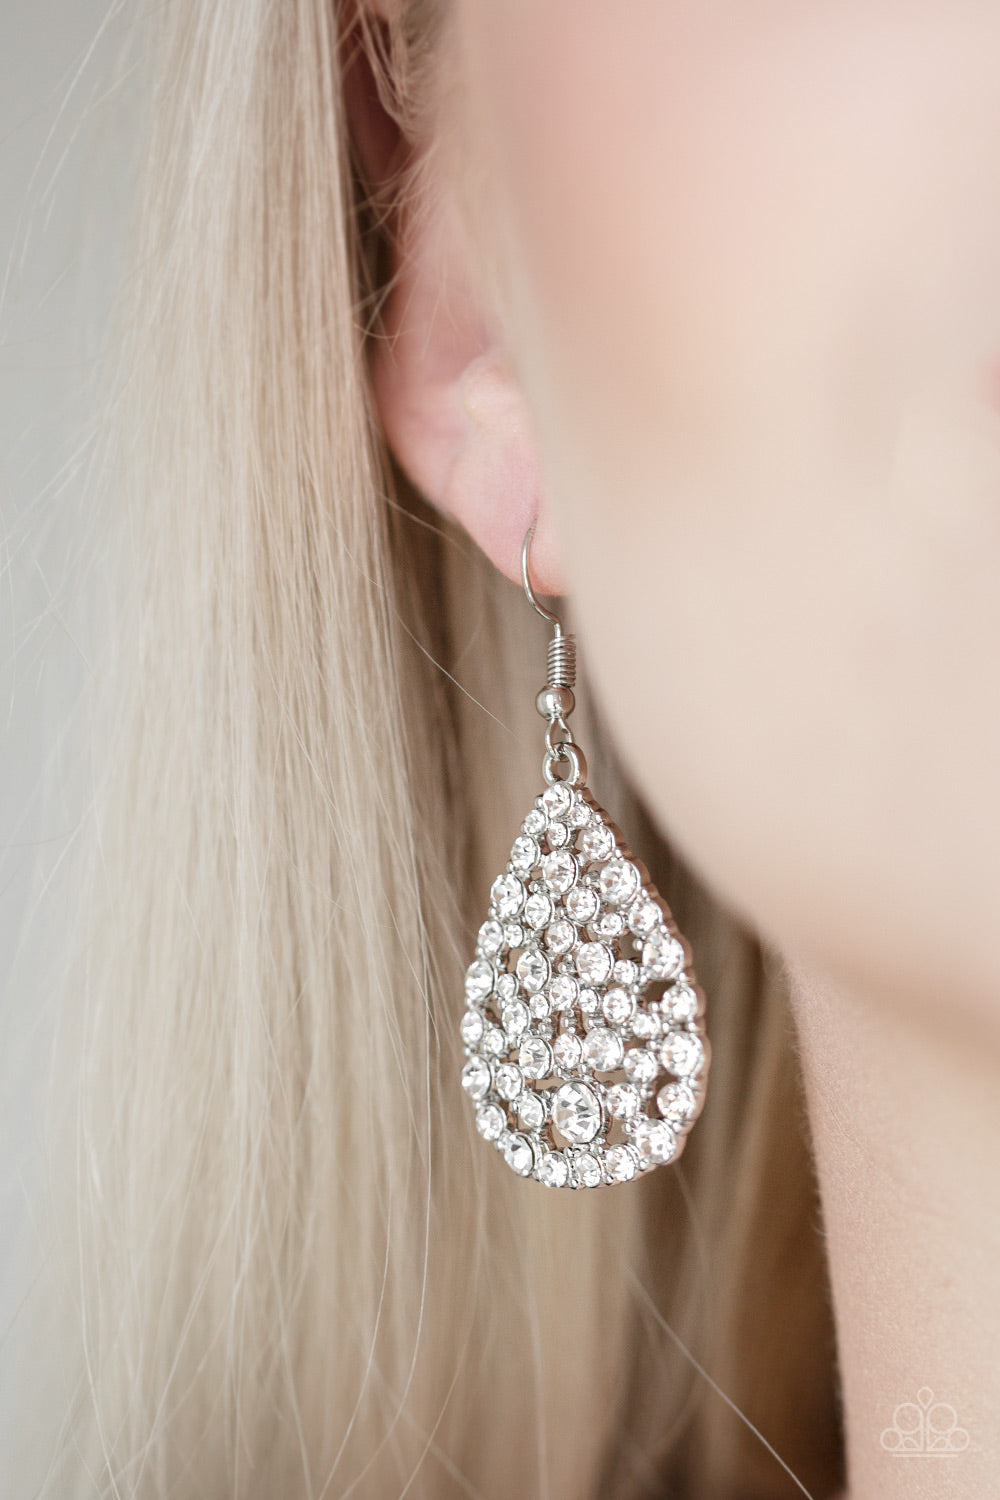 Sparkle Brighter- White and Silver Earrings- Paparazzi Accessories